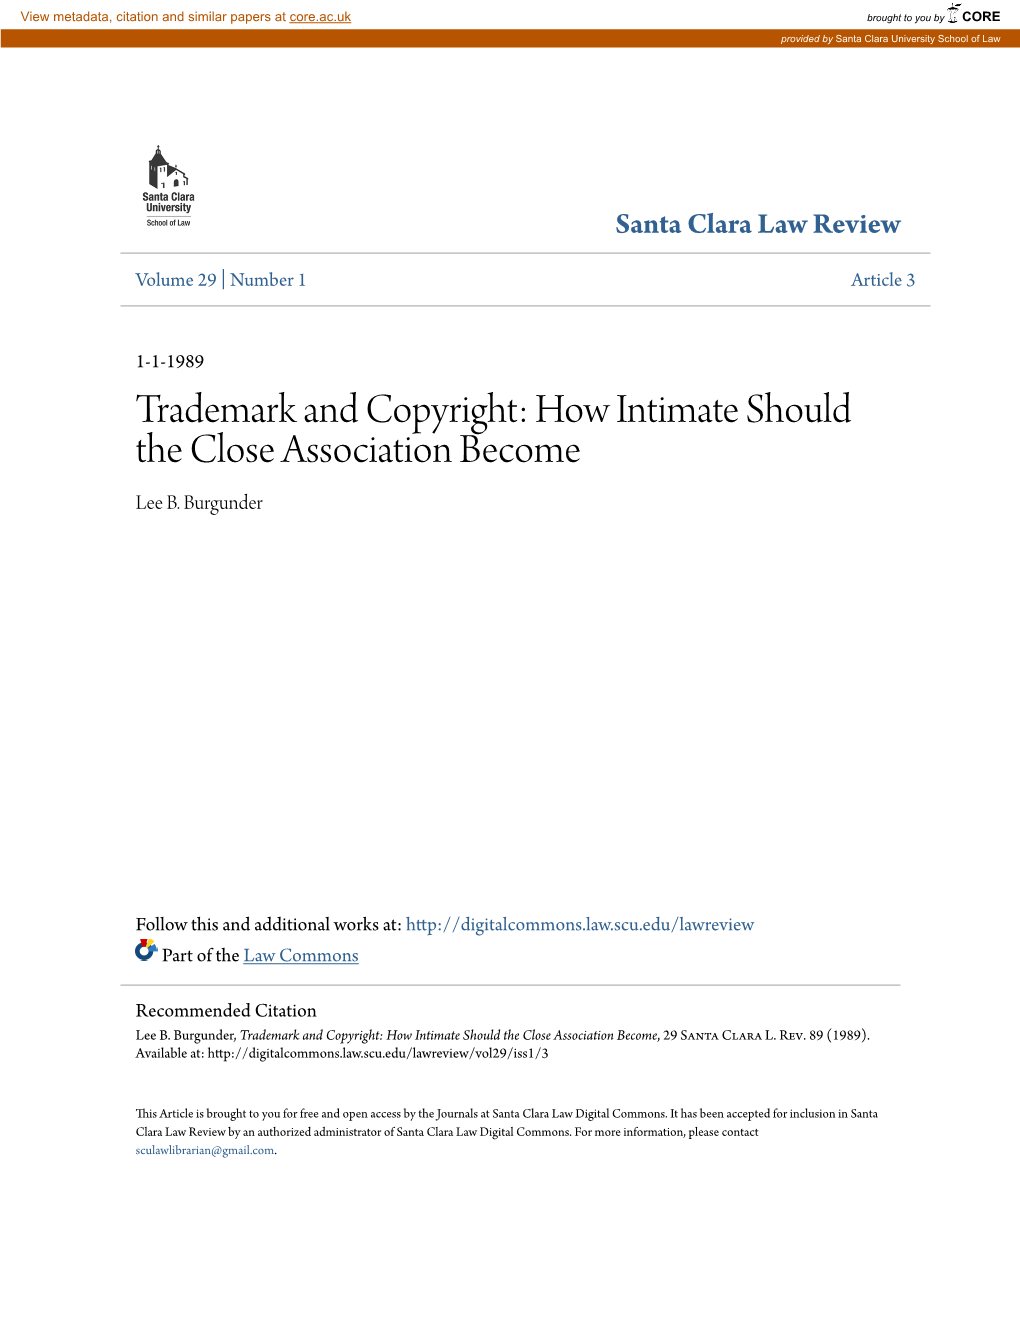 Trademark and Copyright: How Intimate Should the Close Association Become Lee B